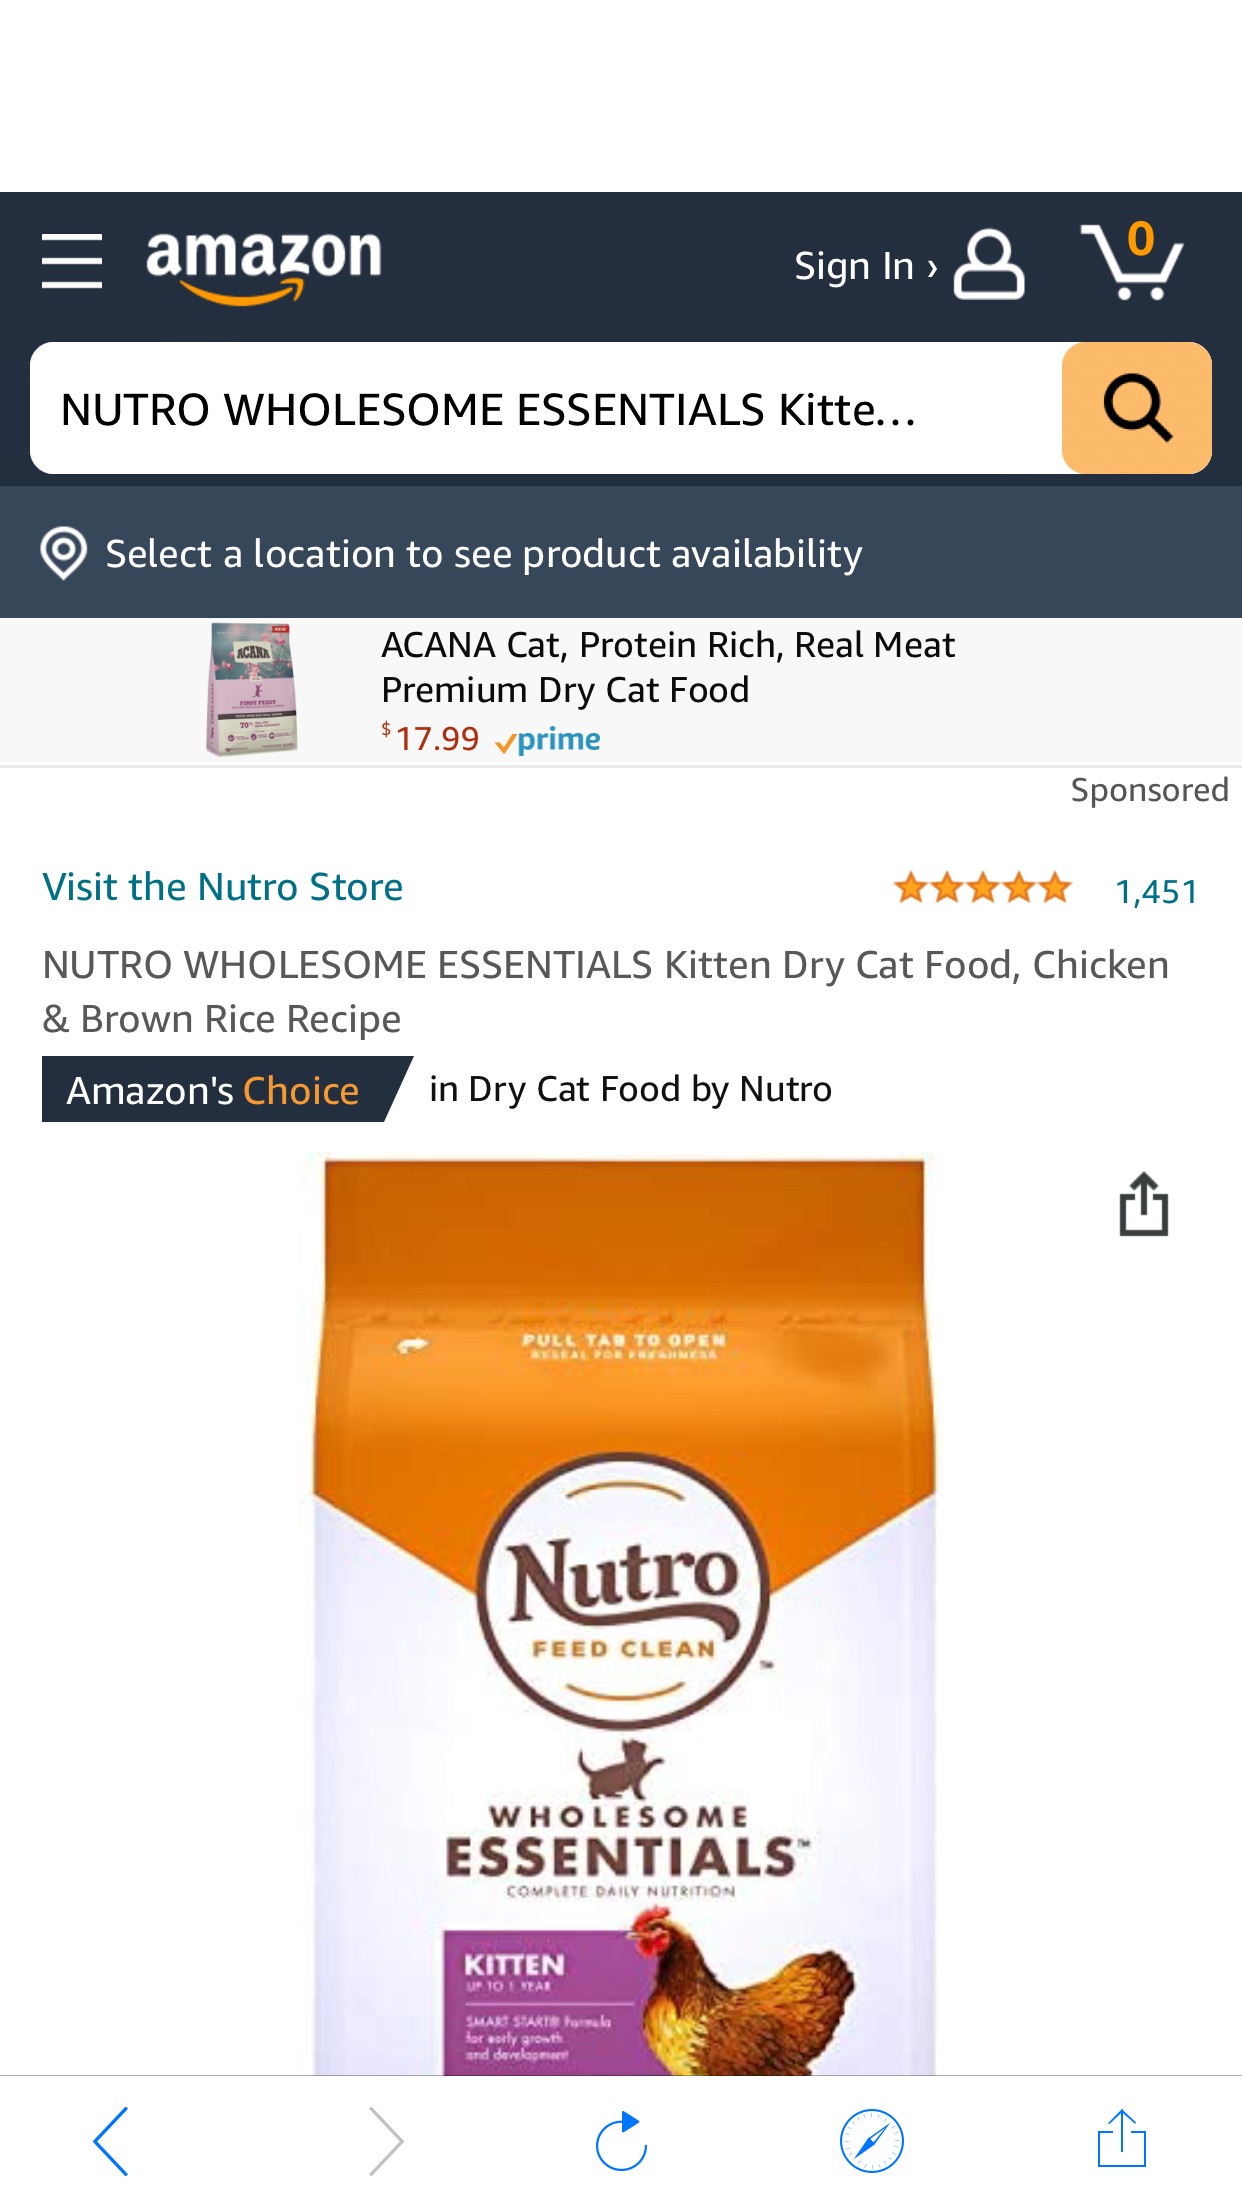 Amazon.com : NUTRO WHOLESOME ESSENTIALS Kitten Natural Dry Cat Food for Early Development Farm-Raised Chicken & Brown Rice Recipe, 5lb. Bag 只要1.9刀